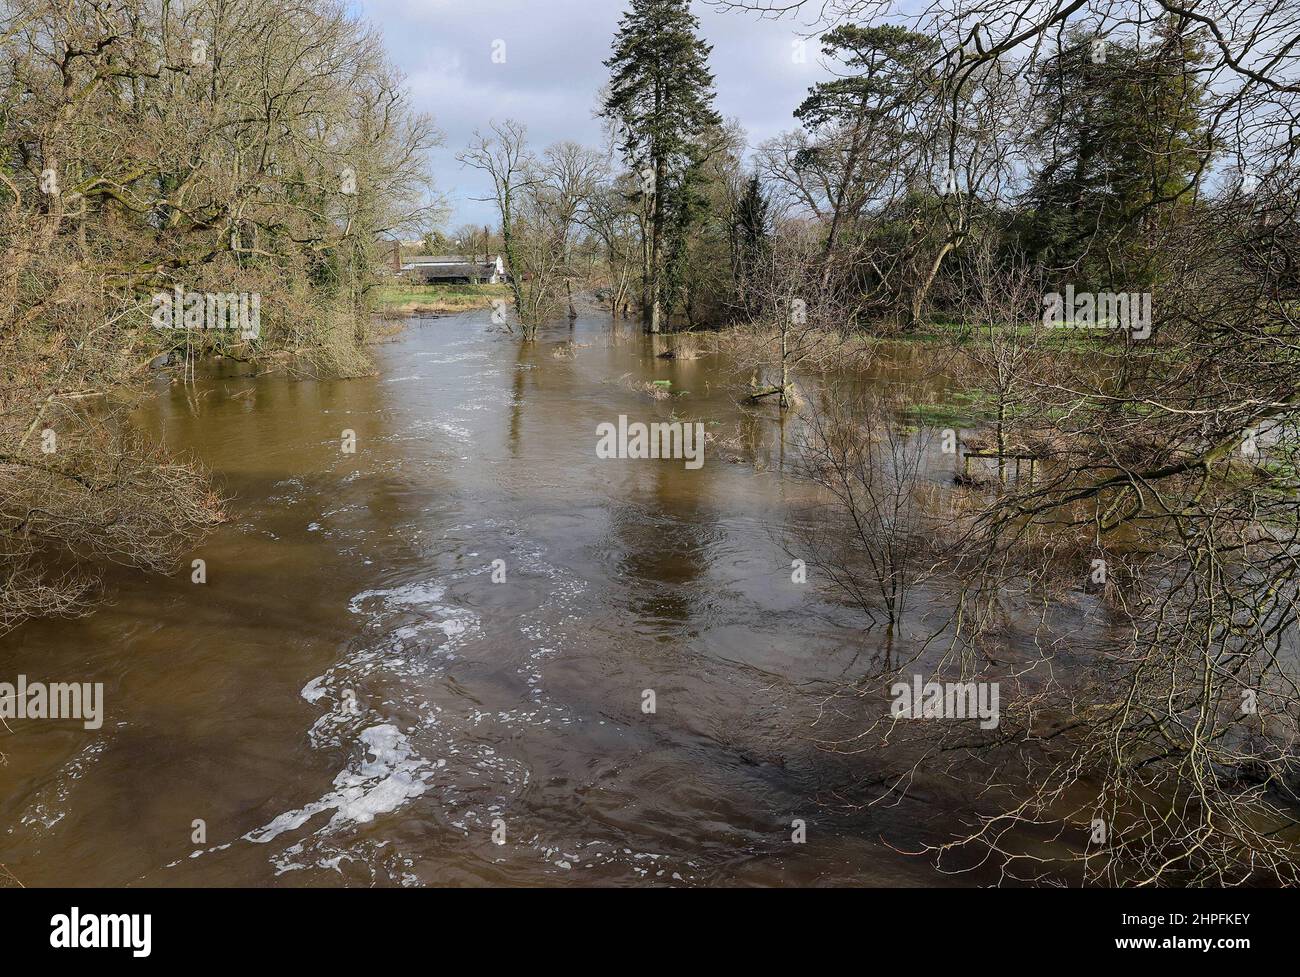 Magheralin, County Down, Northern ireland, UK. 21 Feb 2022. UK weather – after heavy overnight wind and rain from Storm Franklin there was flooding in many areas across Northern Ireland. Near Magheralin the River Lagan burst its banks to flood fields and surrounding agricultural land. Credit: CAZIMB/Alamy Live News. Stock Photo